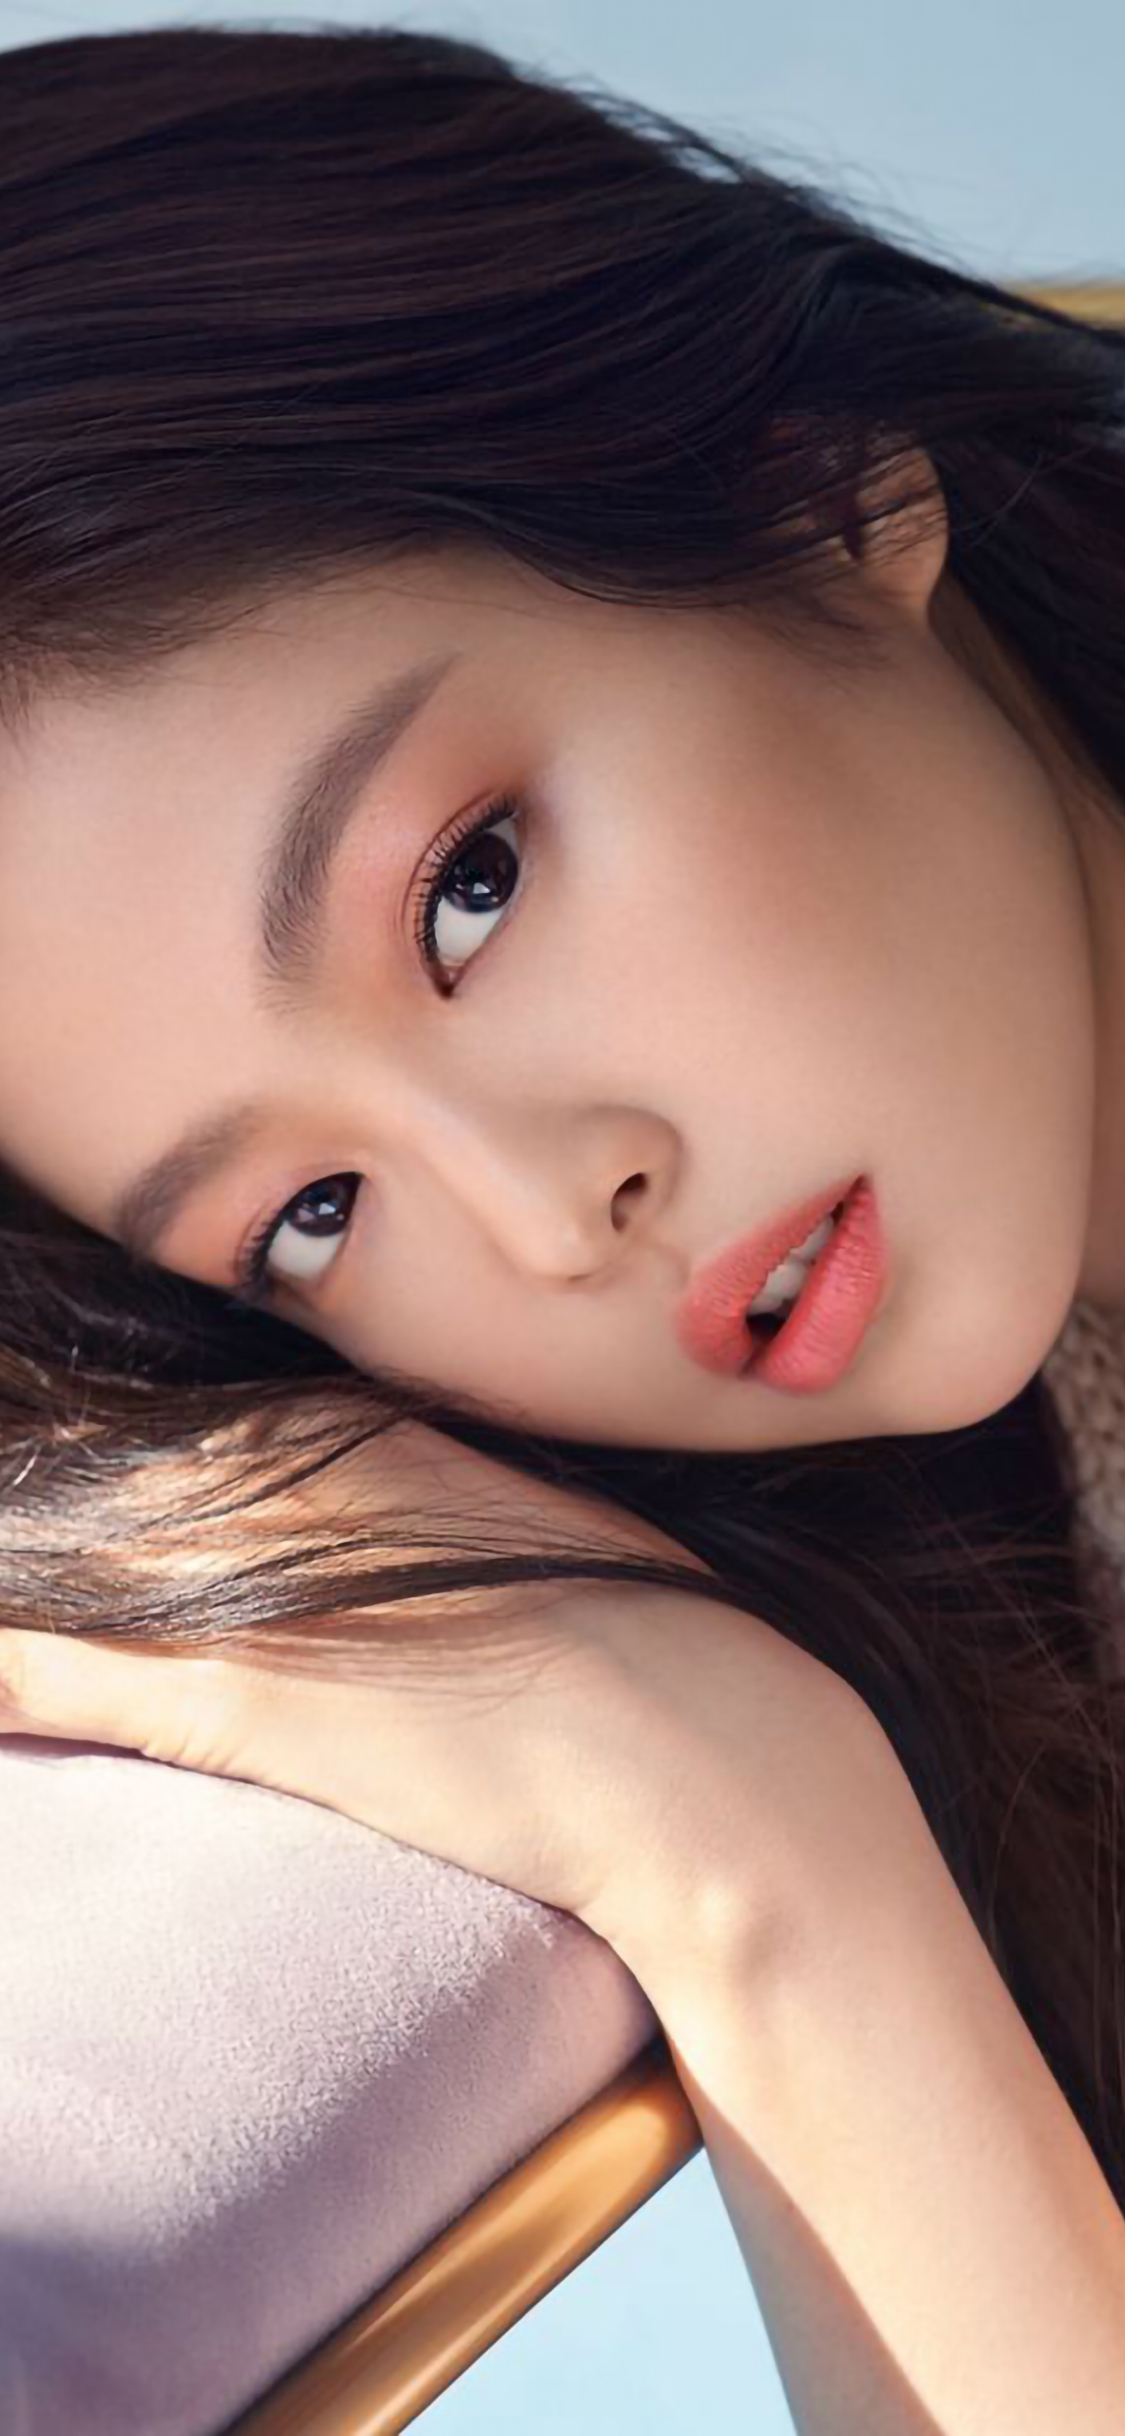 1125x2436 Jennie Kim 4k Iphone Xs Iphone 10 Iphone X Wallpaper Hd Music 4k Wallpapers Images Photos And Background